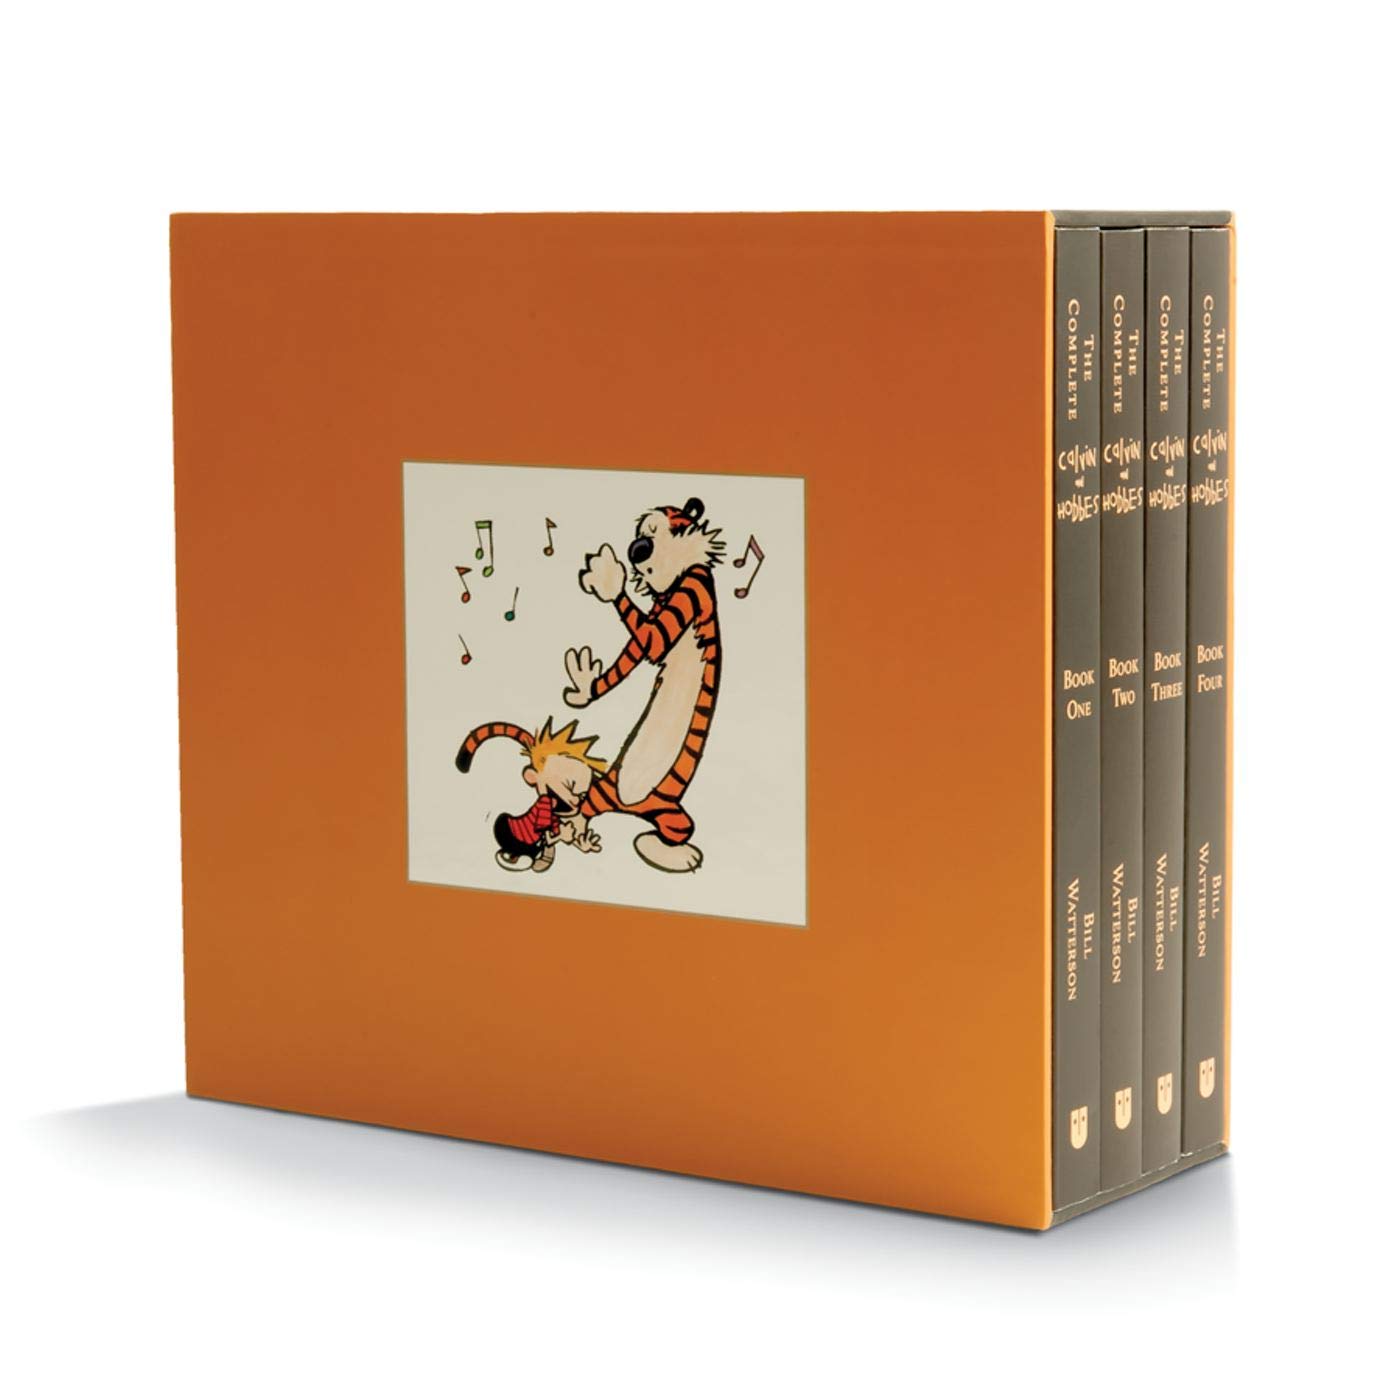 A handsome box set of the complete Calvin and Hobbes catoons, in an orange box, with four books with dark spines